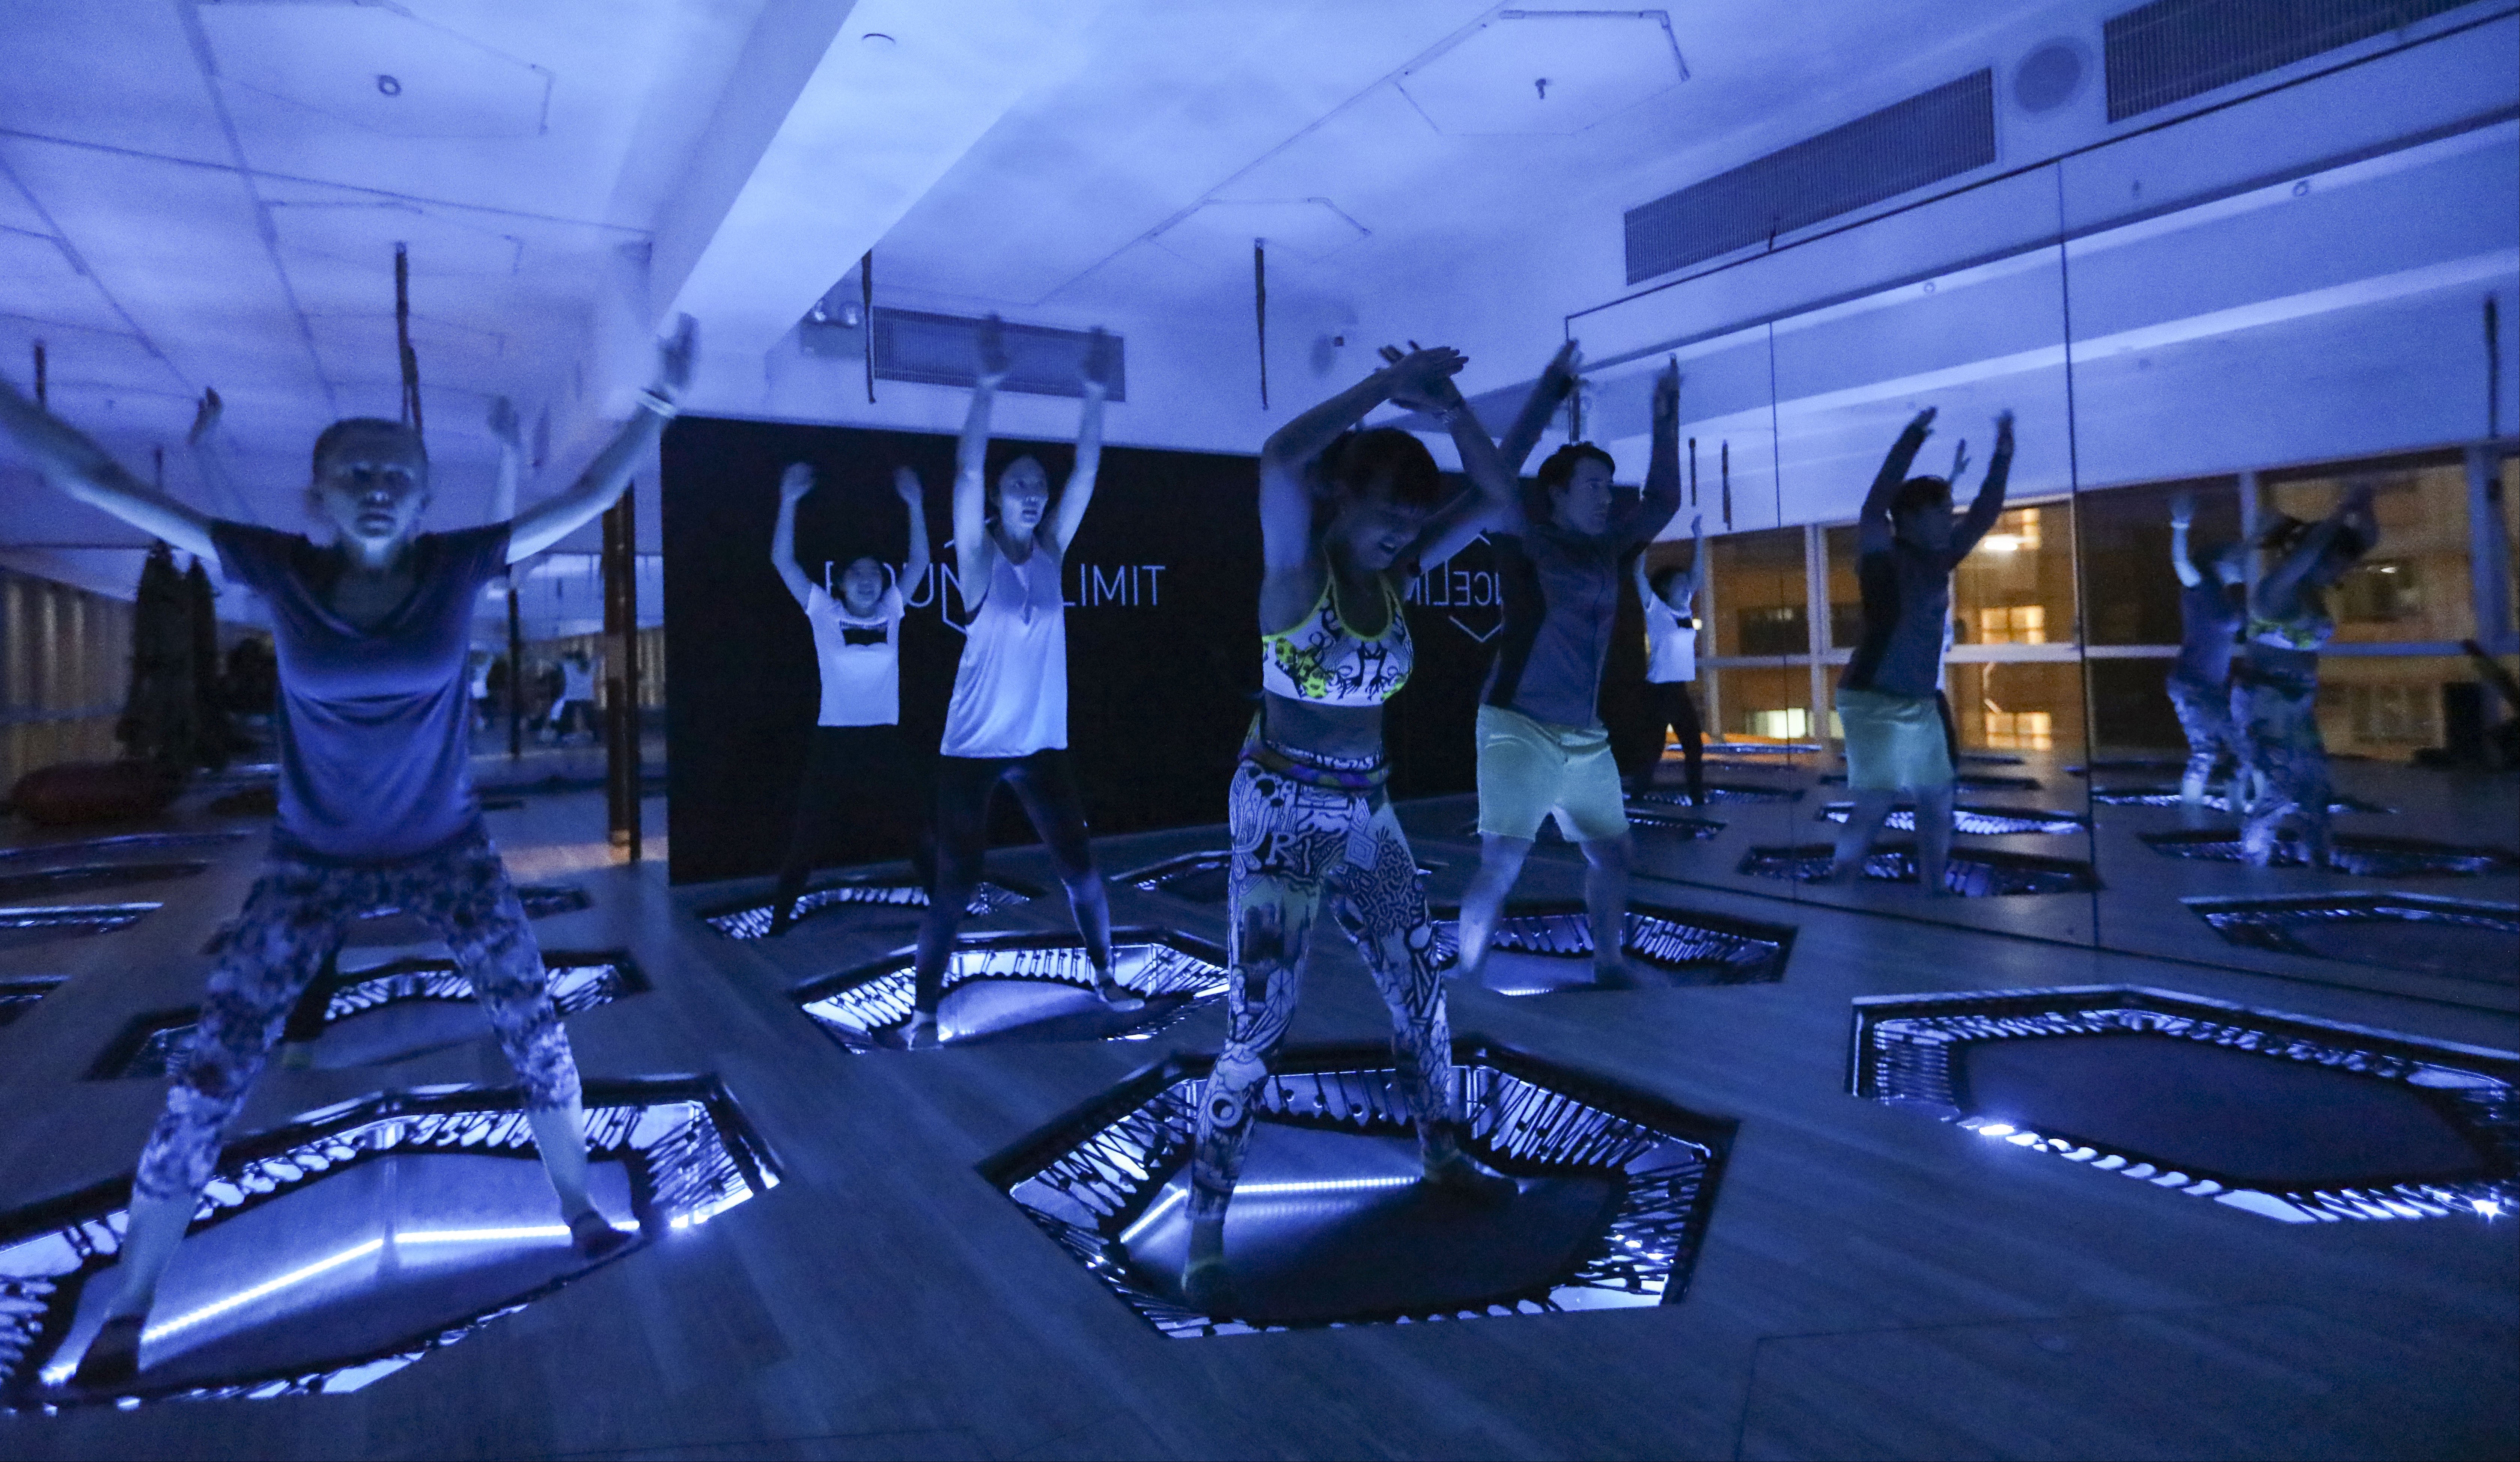 LED Game Night at Bounce Limit, the only rebound fitness gym in Asia. Photo: Sam Tsang